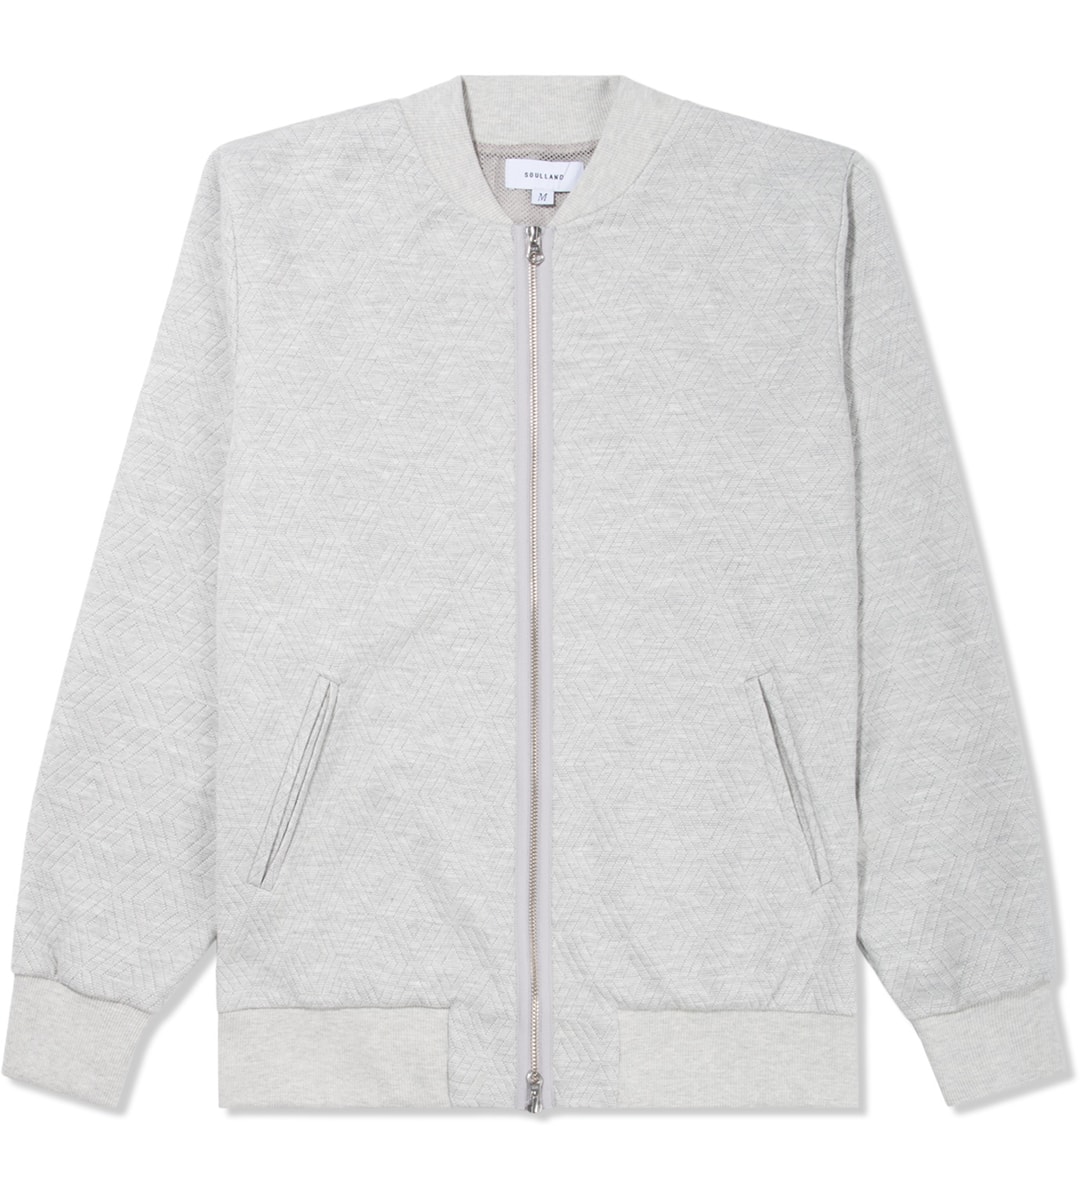 Soulland - Grey Ross Jacket | HBX - Globally Curated Fashion and ...